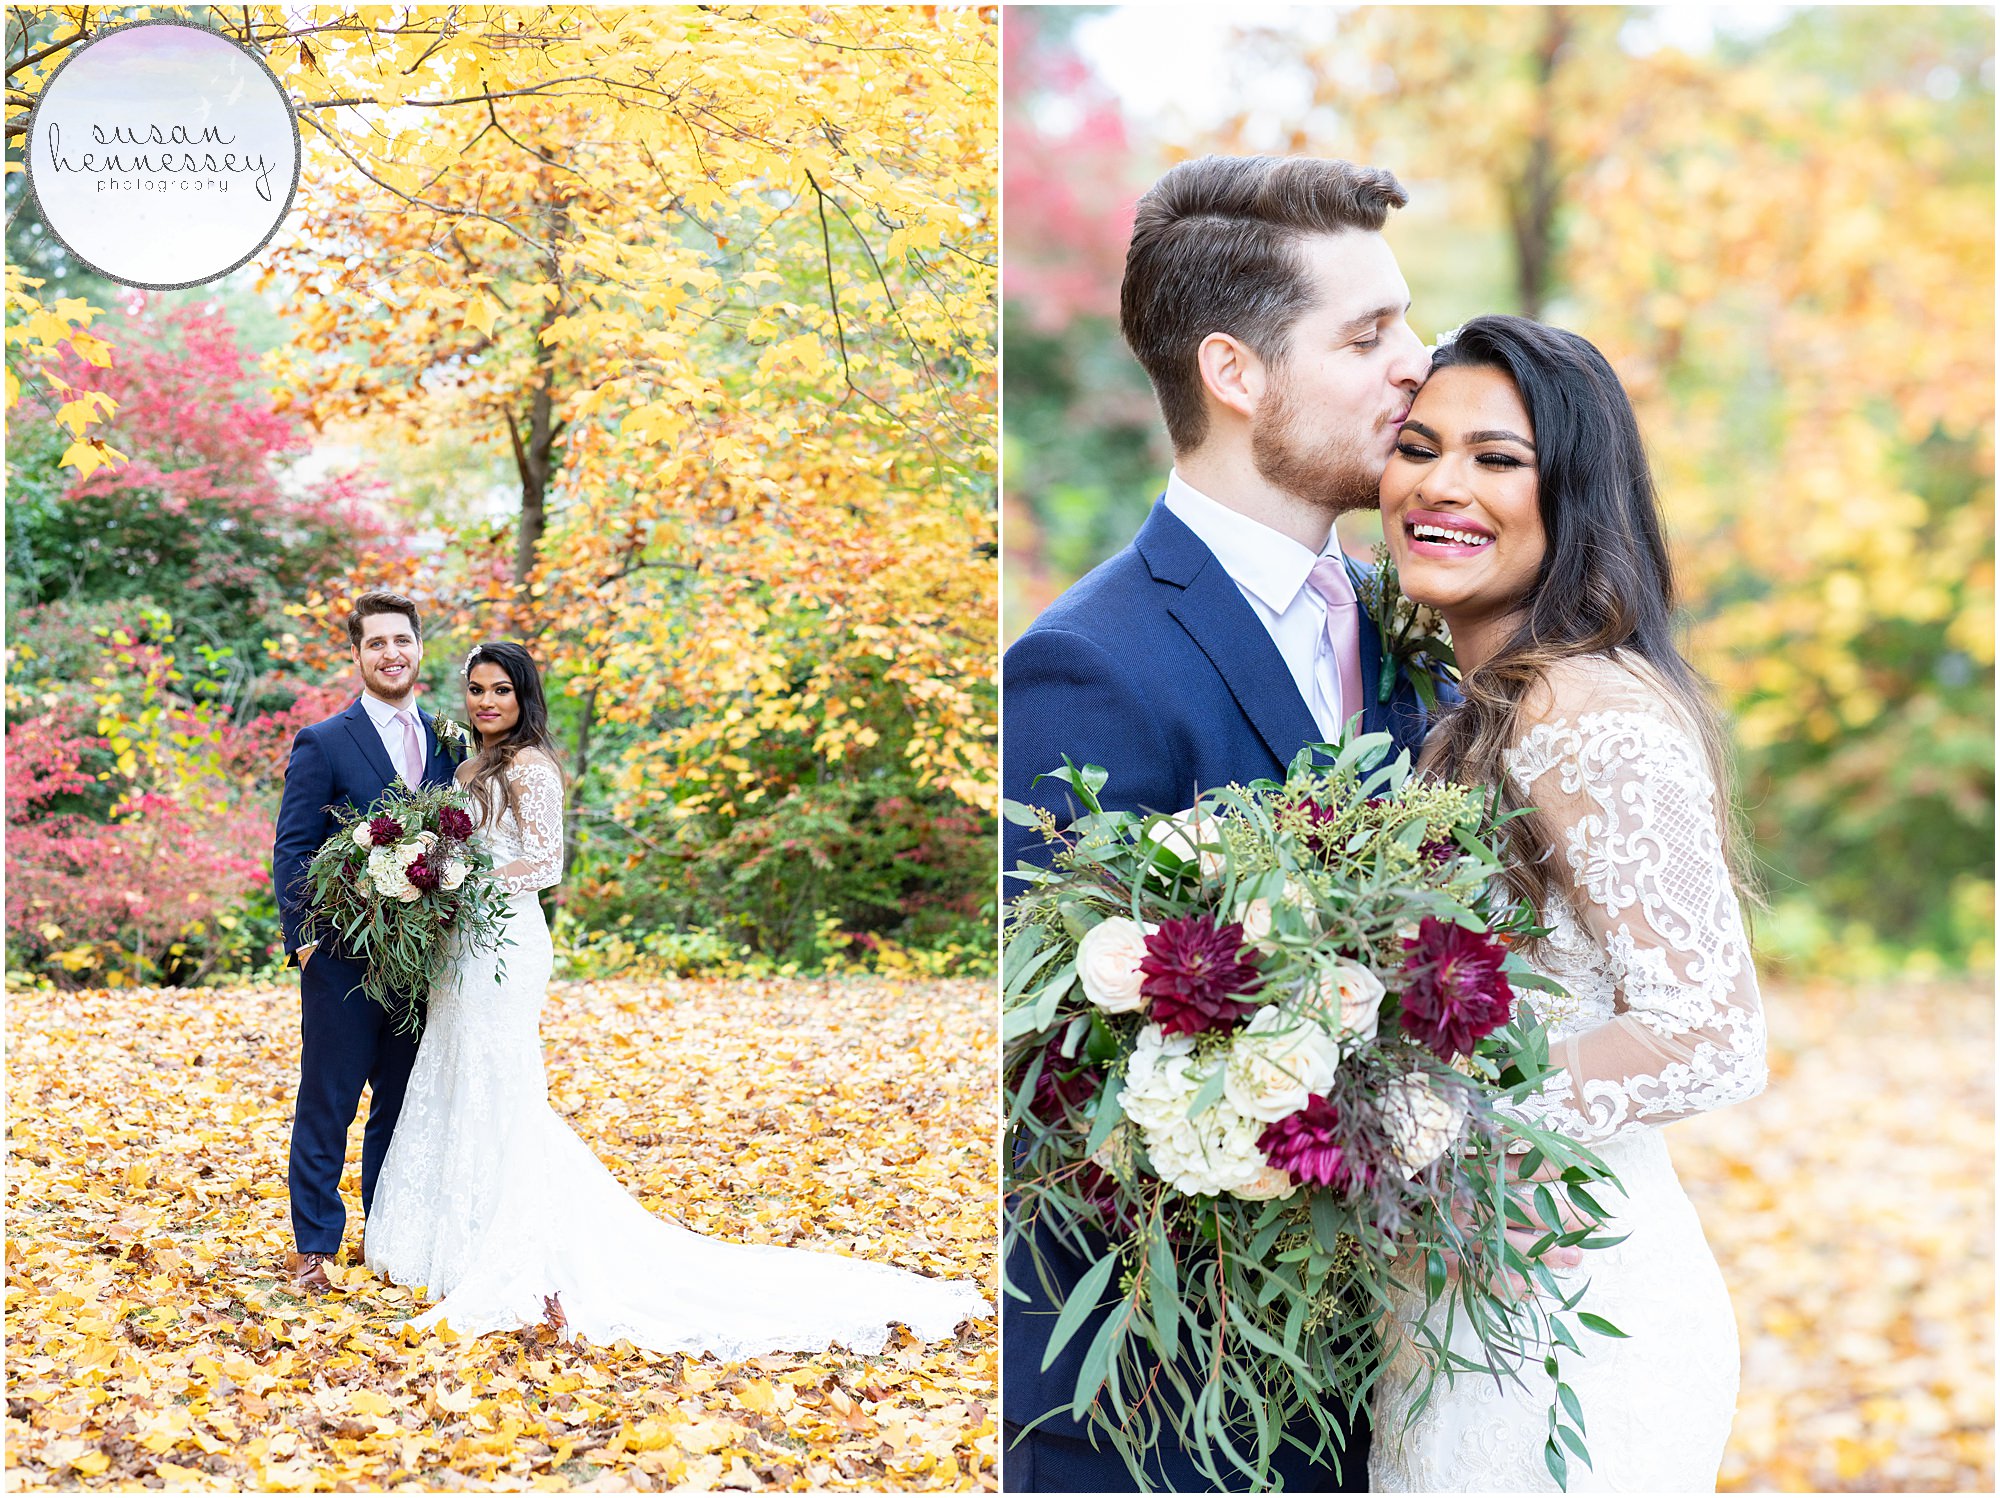 Fiza and Thomas had a South Jersey Microwedding with portraits in Strawbridge Lake Park in Moorestown